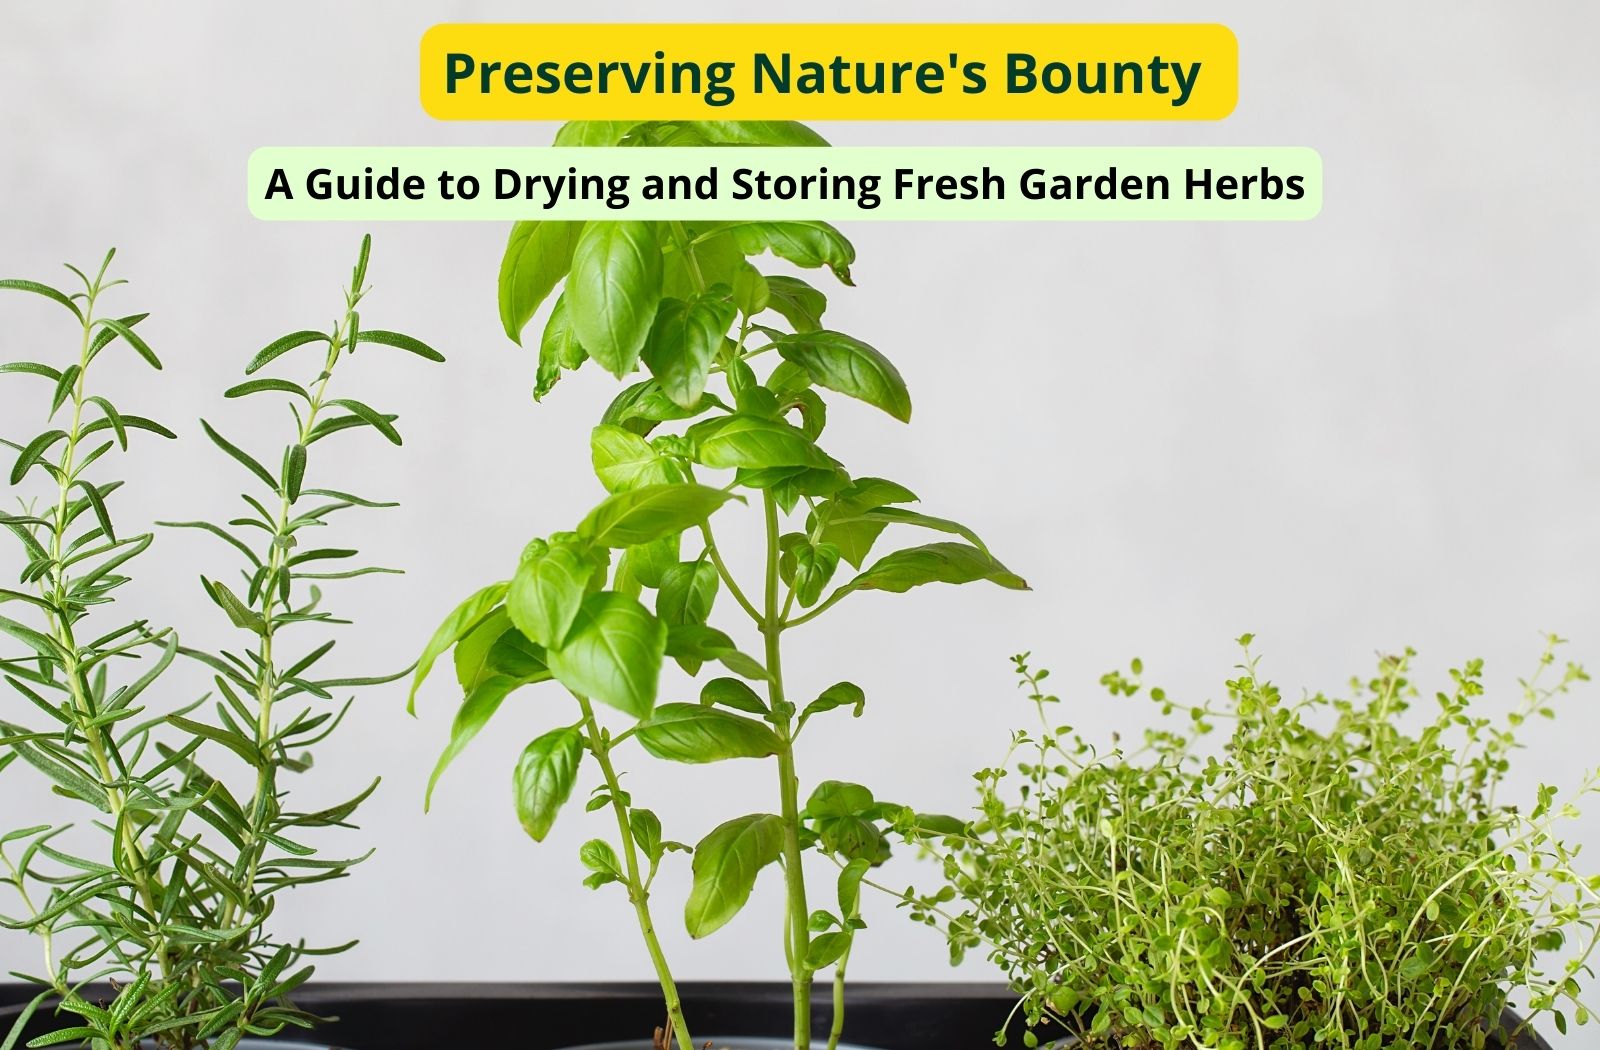 Preserving Nature's Bounty: A Guide to Drying and Storing Fresh Garden Herbs